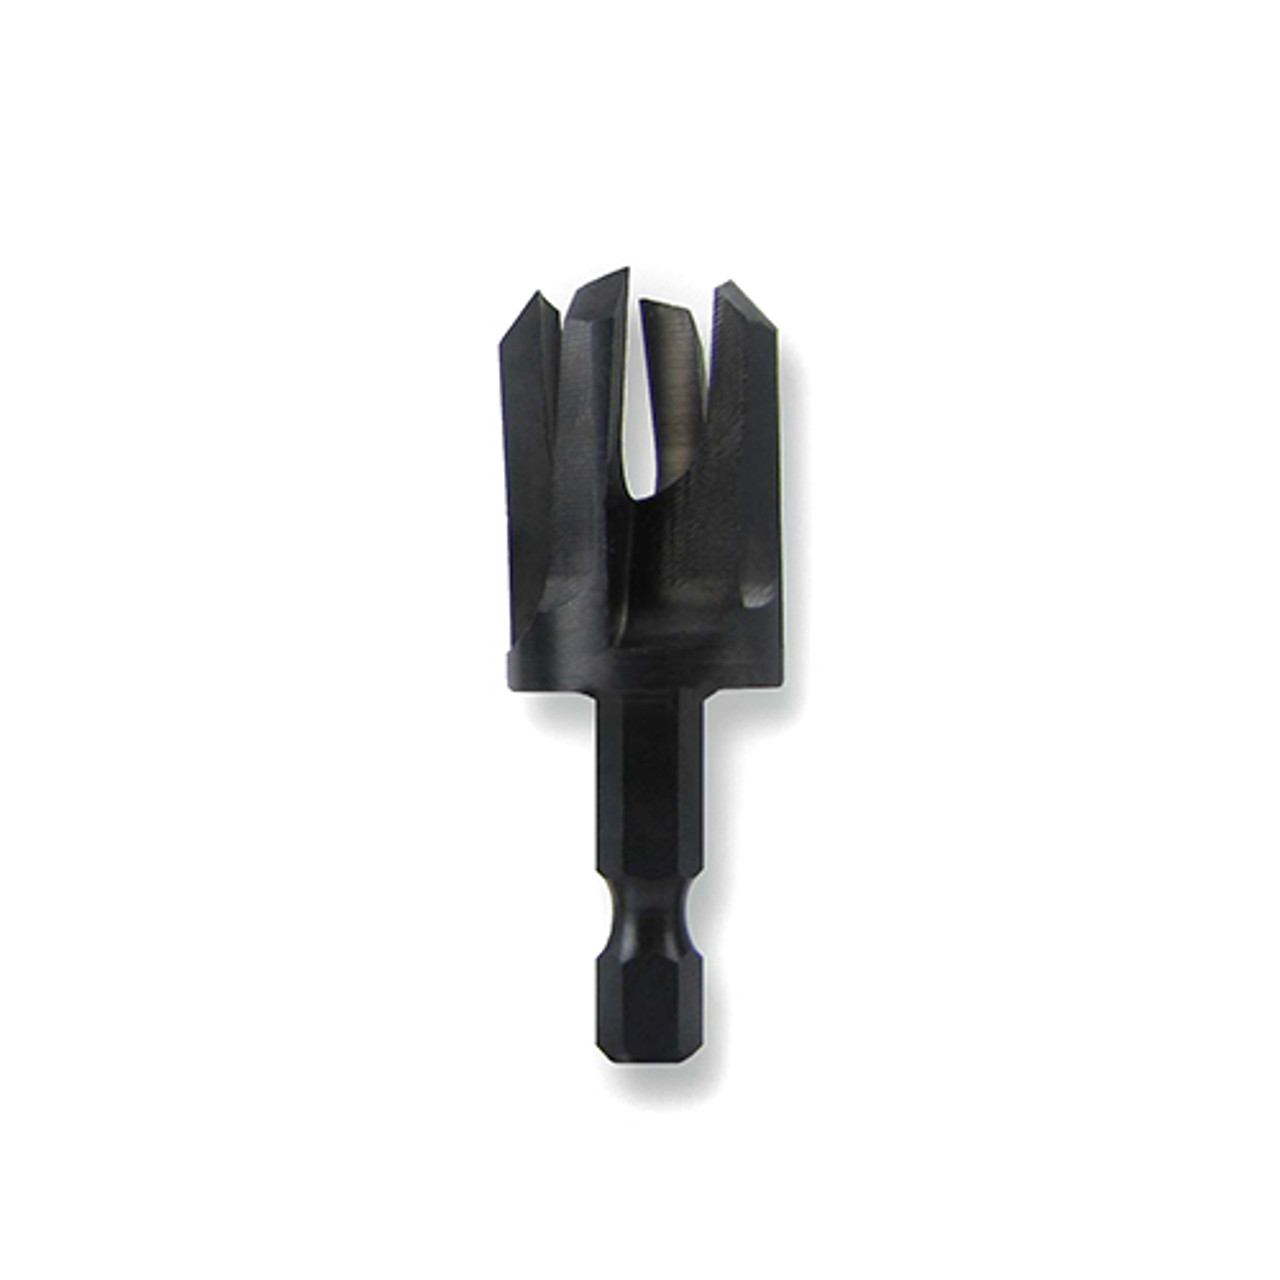 Snappy 1/2" Tapered Plug Cutter 1/4" Shank